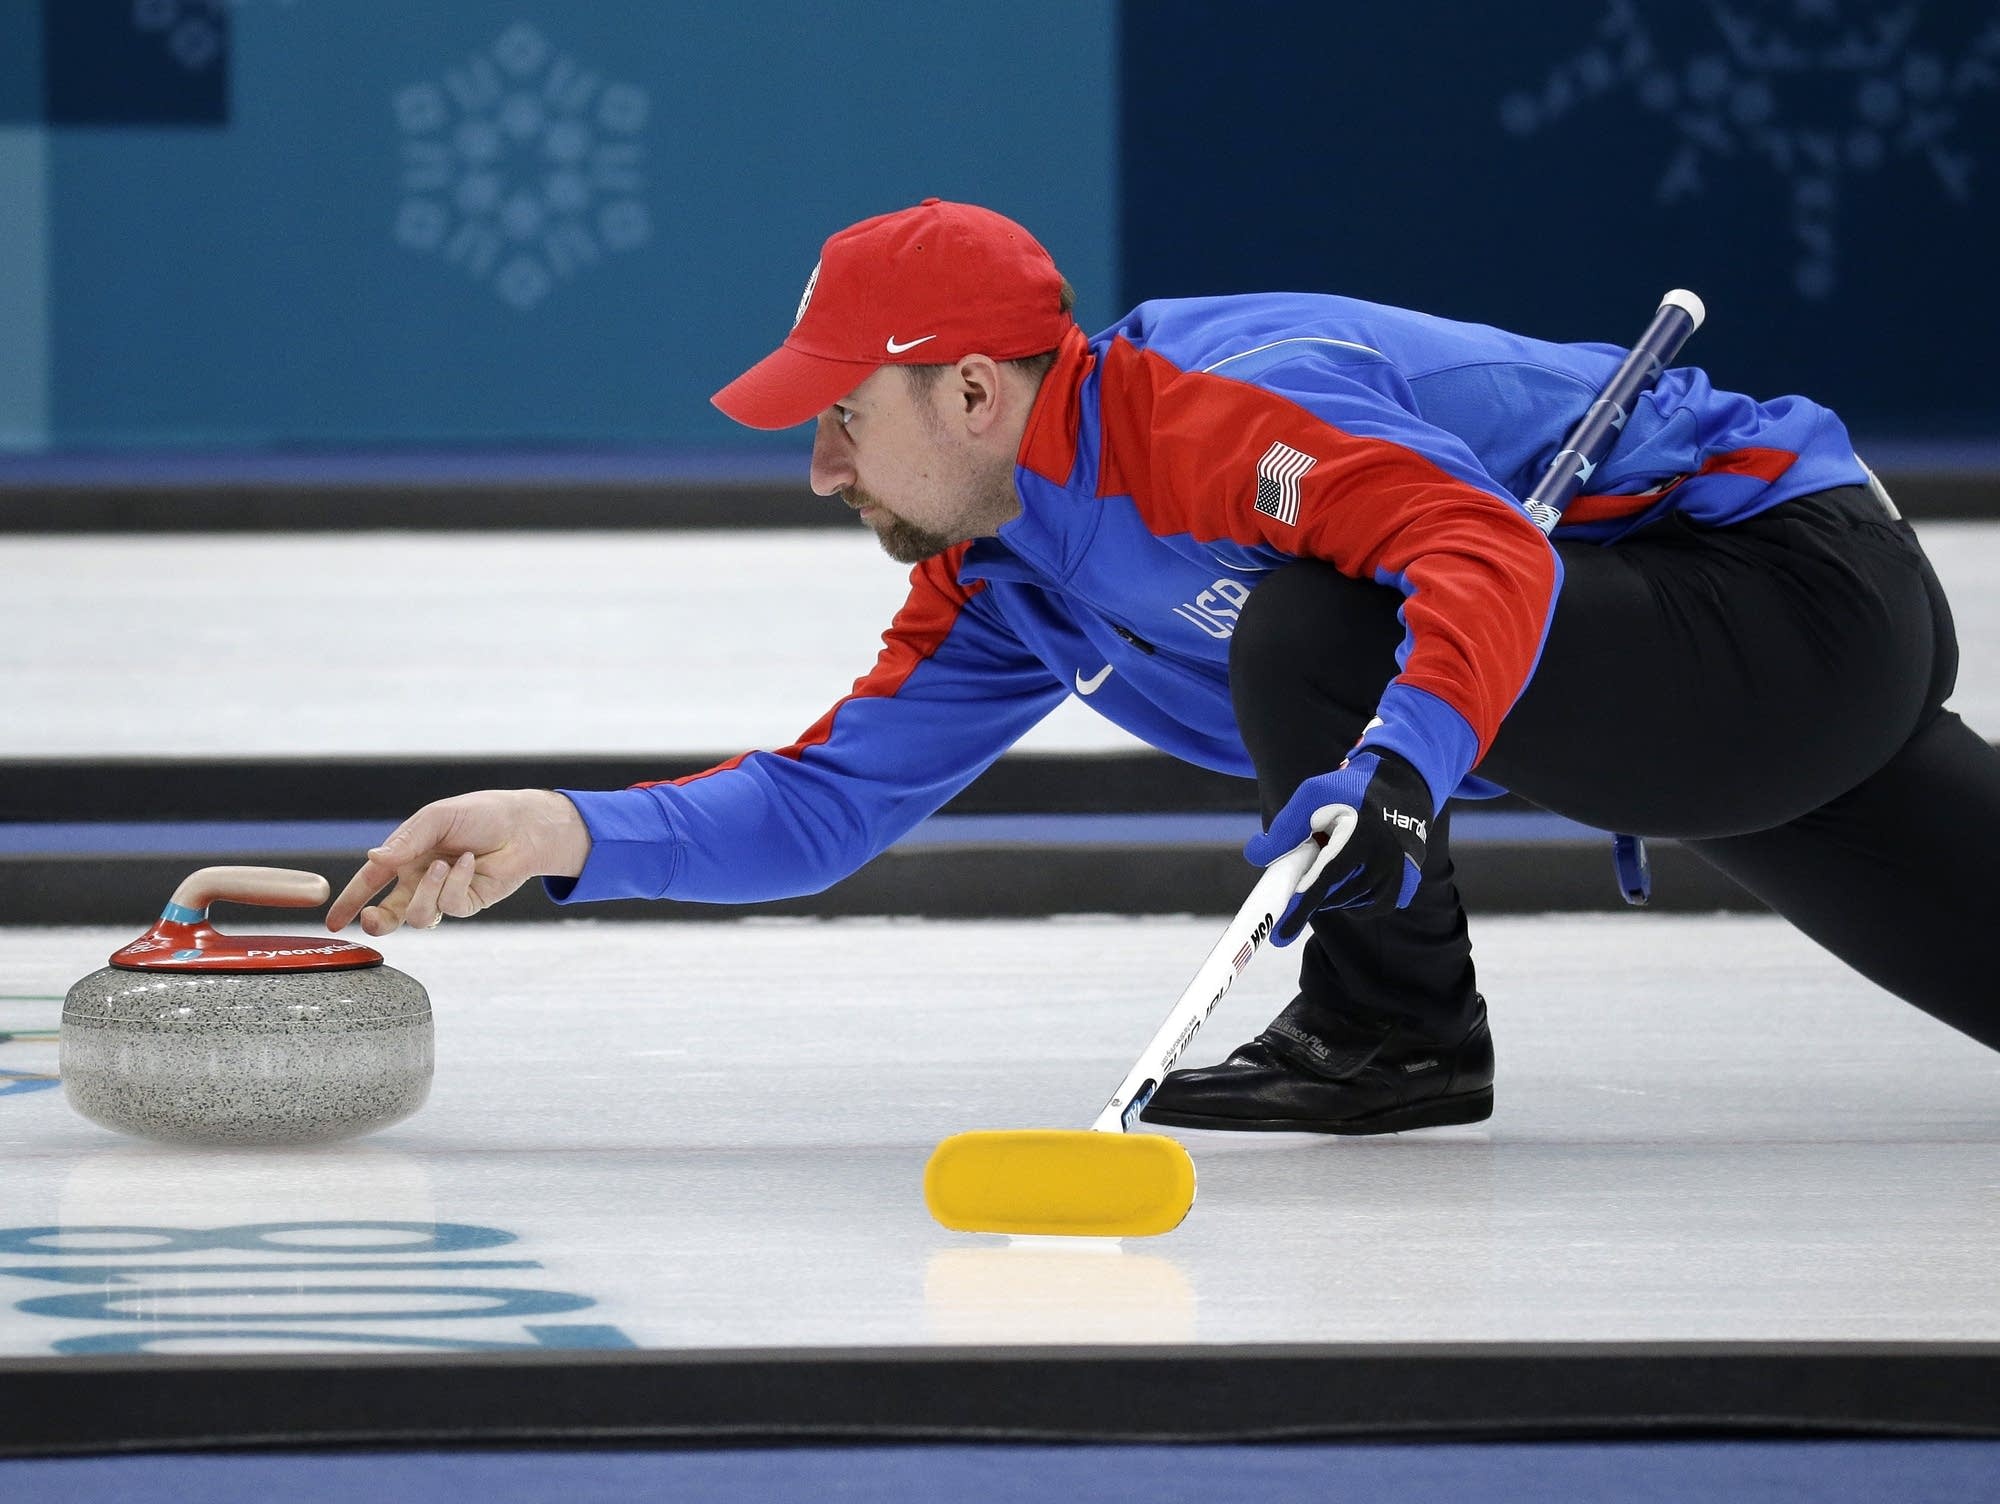 Mystery of curling, Curling physics, Science of curling, Curling phenomenon, 2000x1510 HD Desktop